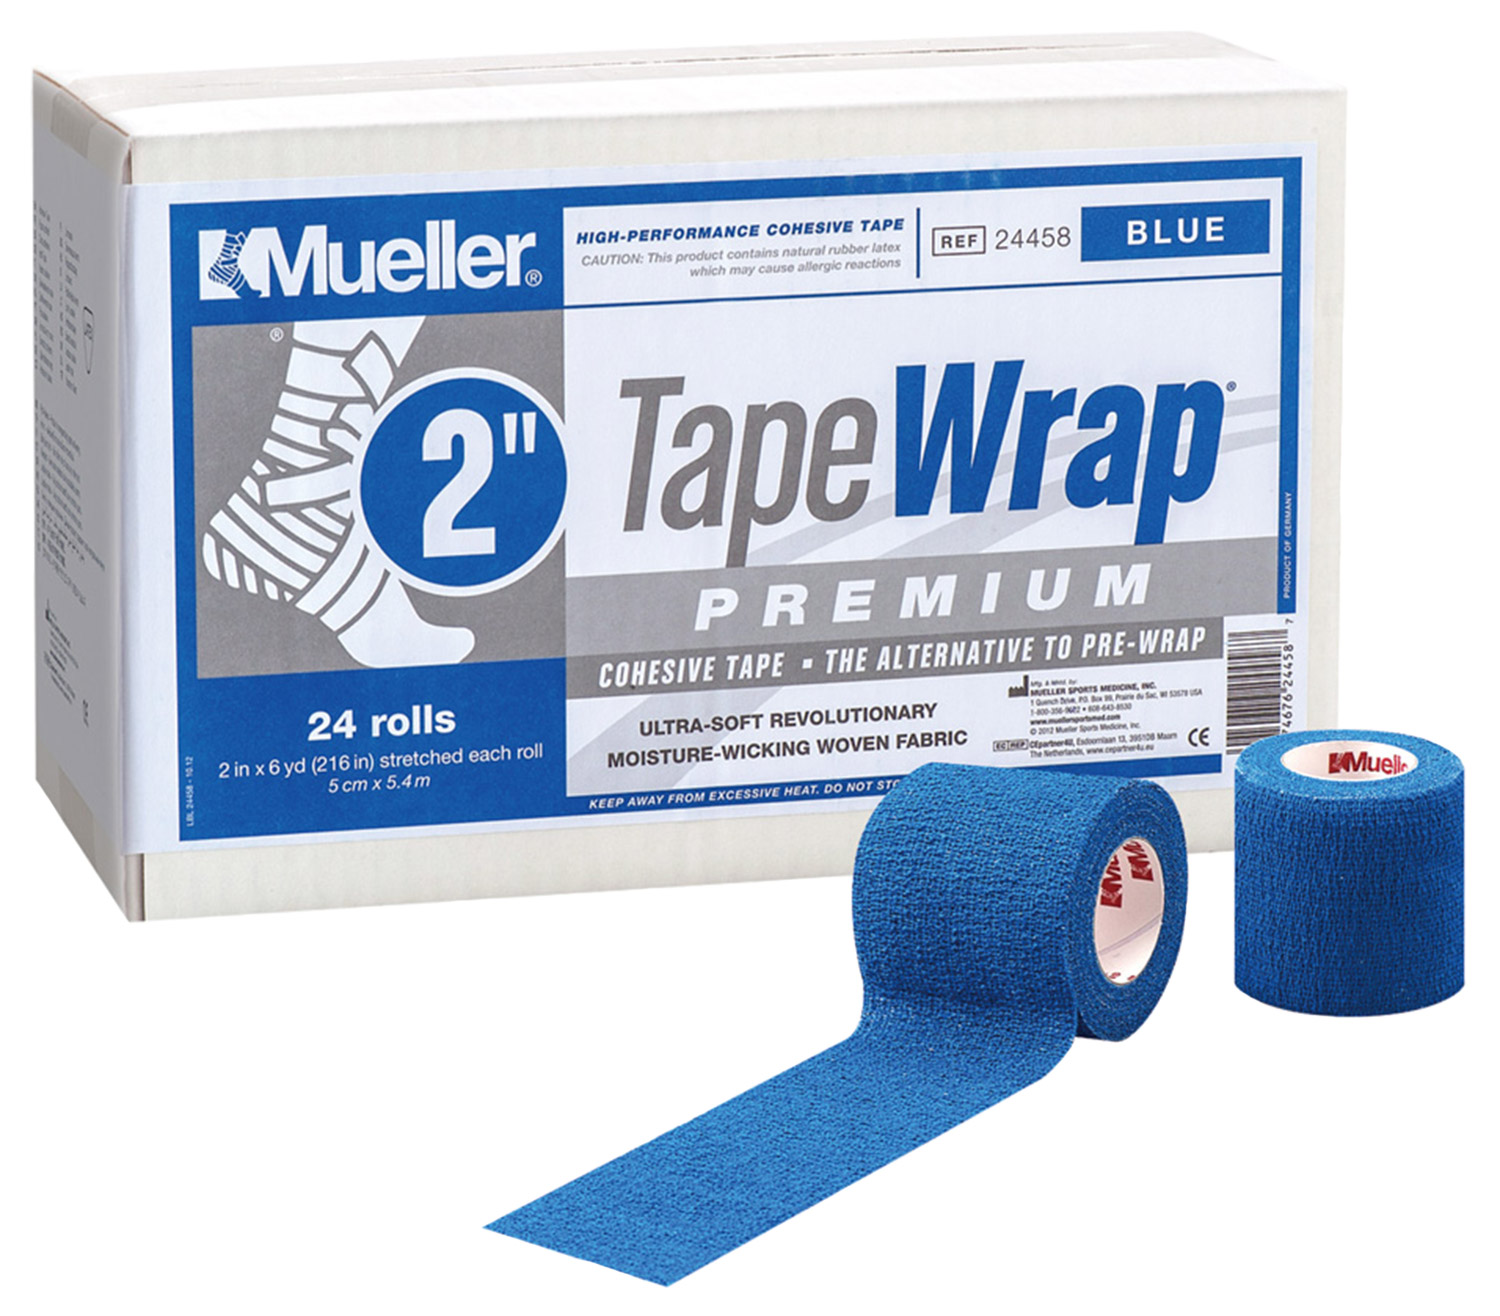 Another tape wrap